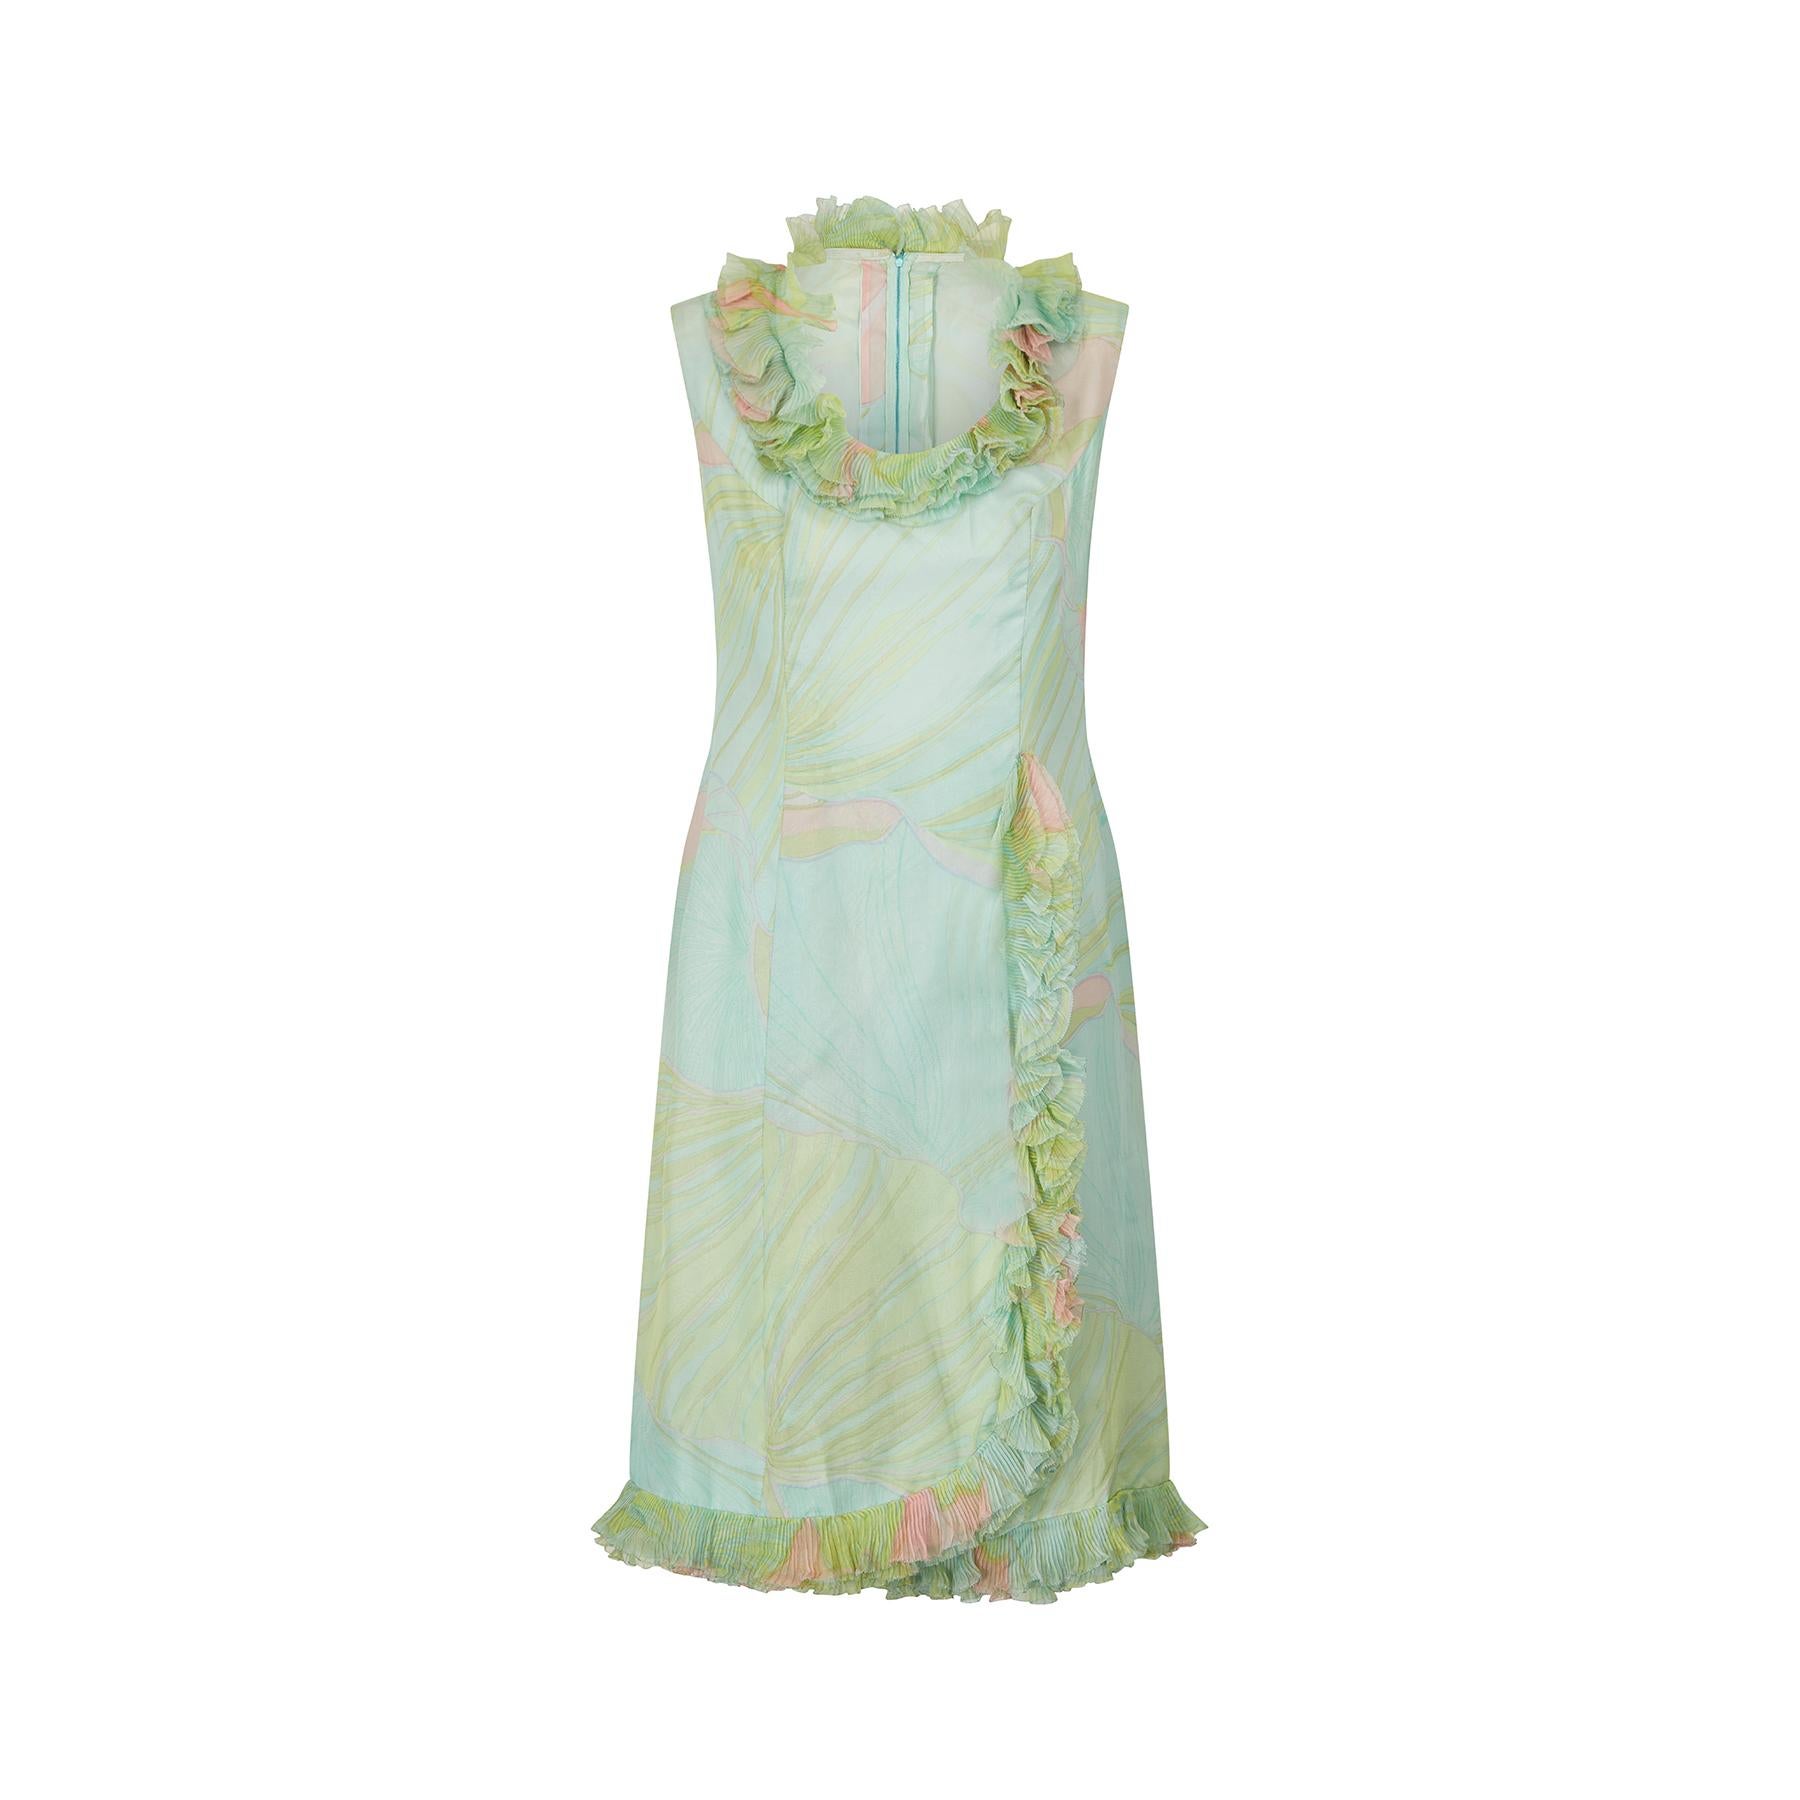 This original vintage French couture dress is made from a very high quality mint green silk chiffon, with an abstract swirl print in pale blue, pink, lime and peach shades. Cut in a classic 60s shift shape, it was almost certainly made by someone